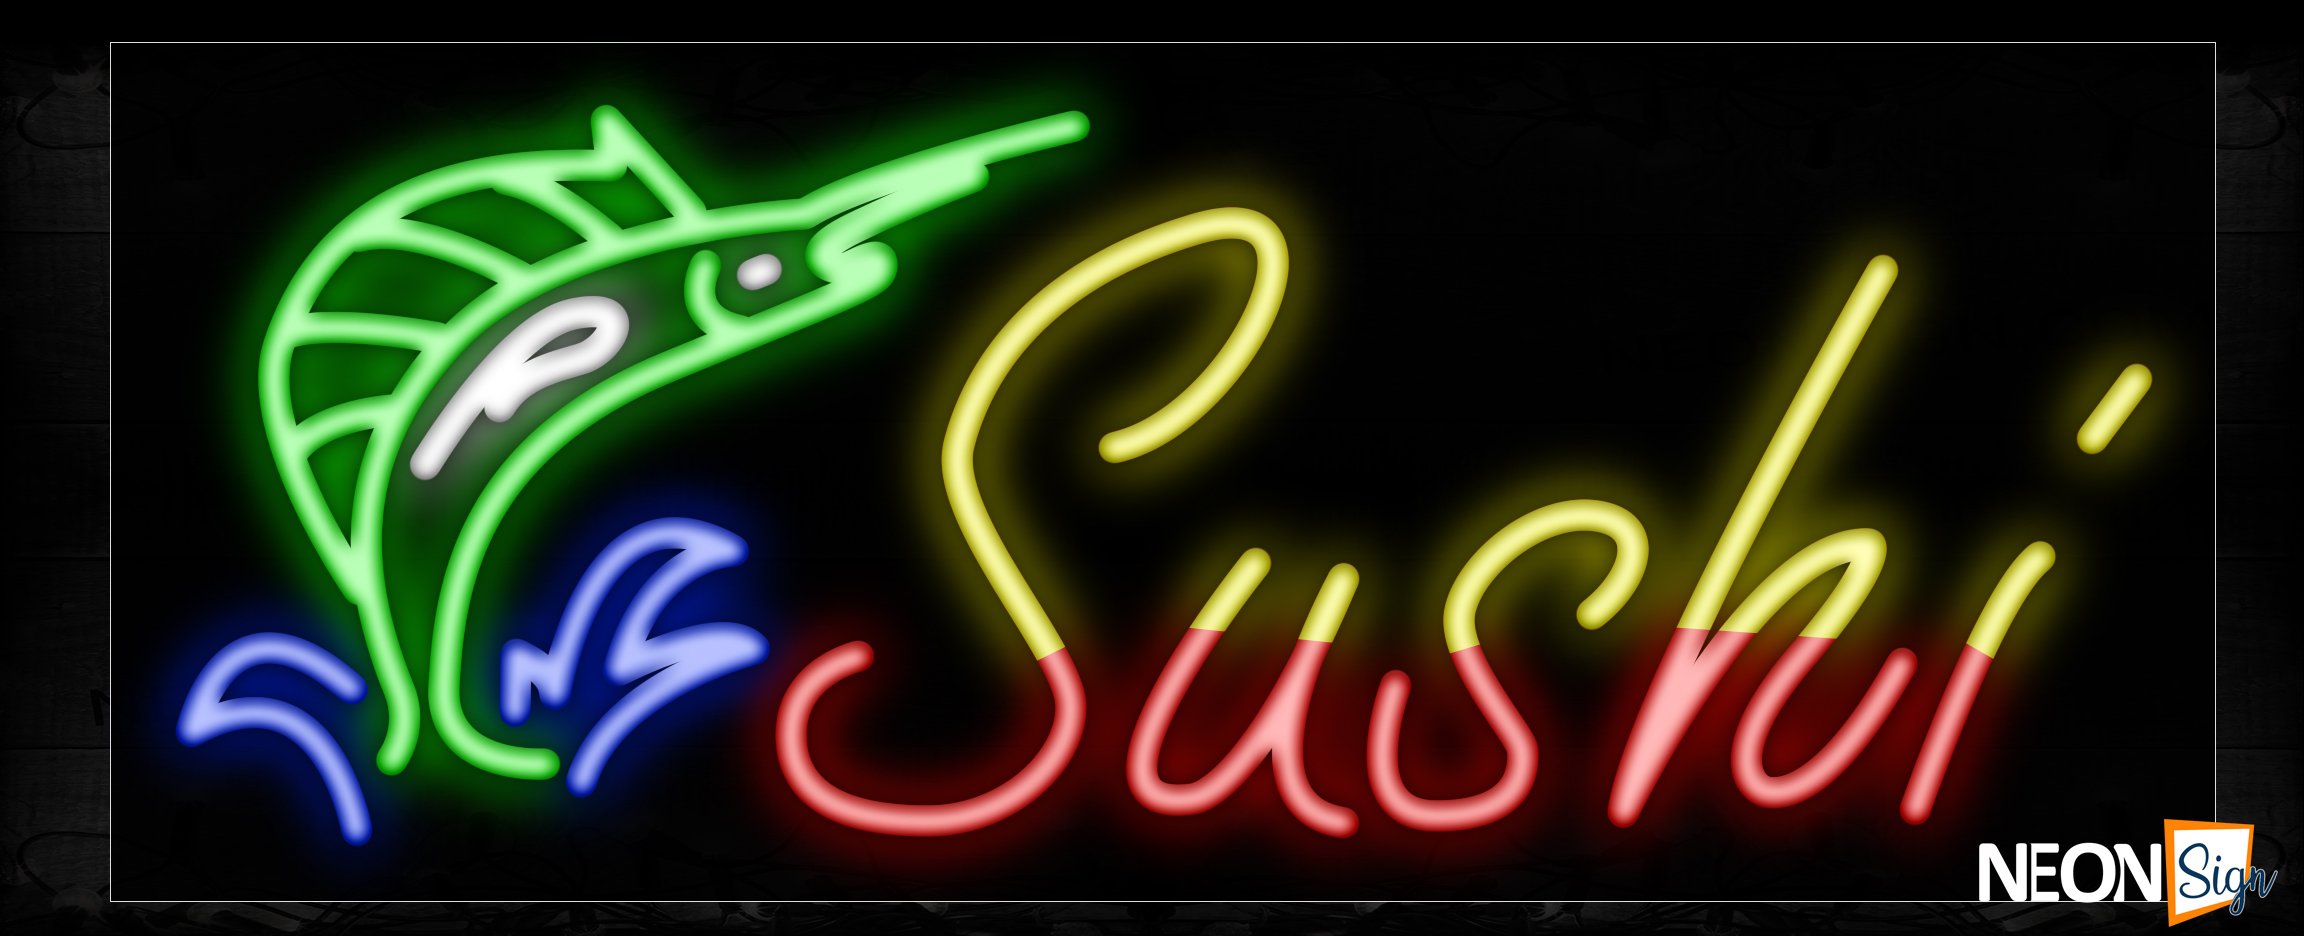 Image of 10909 Sushi With A Sword Fish On The Left Traditional Neon_13x32 Black Backing